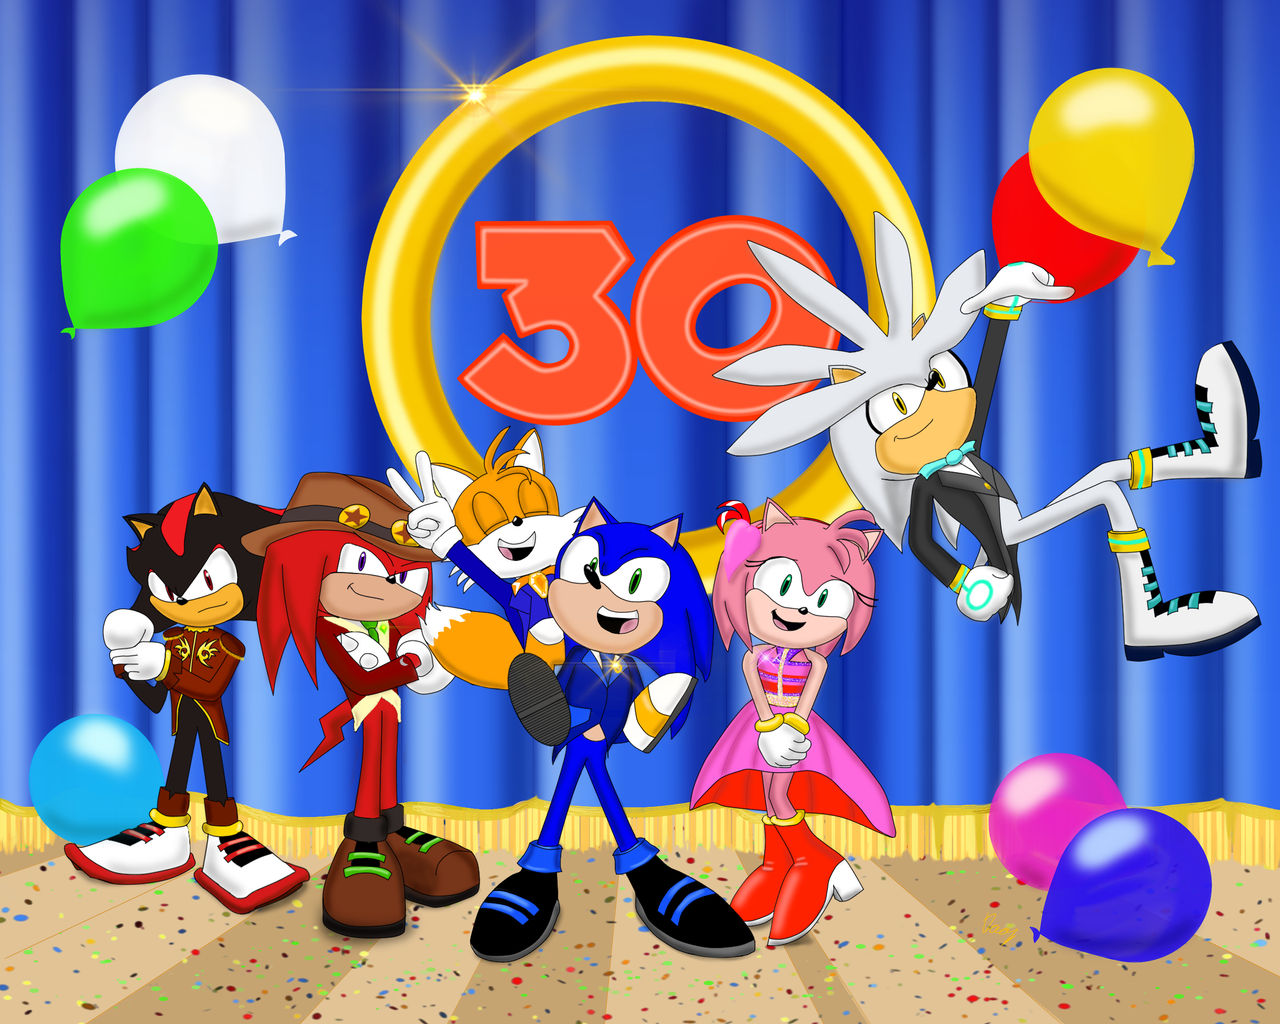 Classic Sonic Generations by Pho3nixSFM on DeviantArt  Sonic birthday  parties, Sonic birthday, Classic sonic